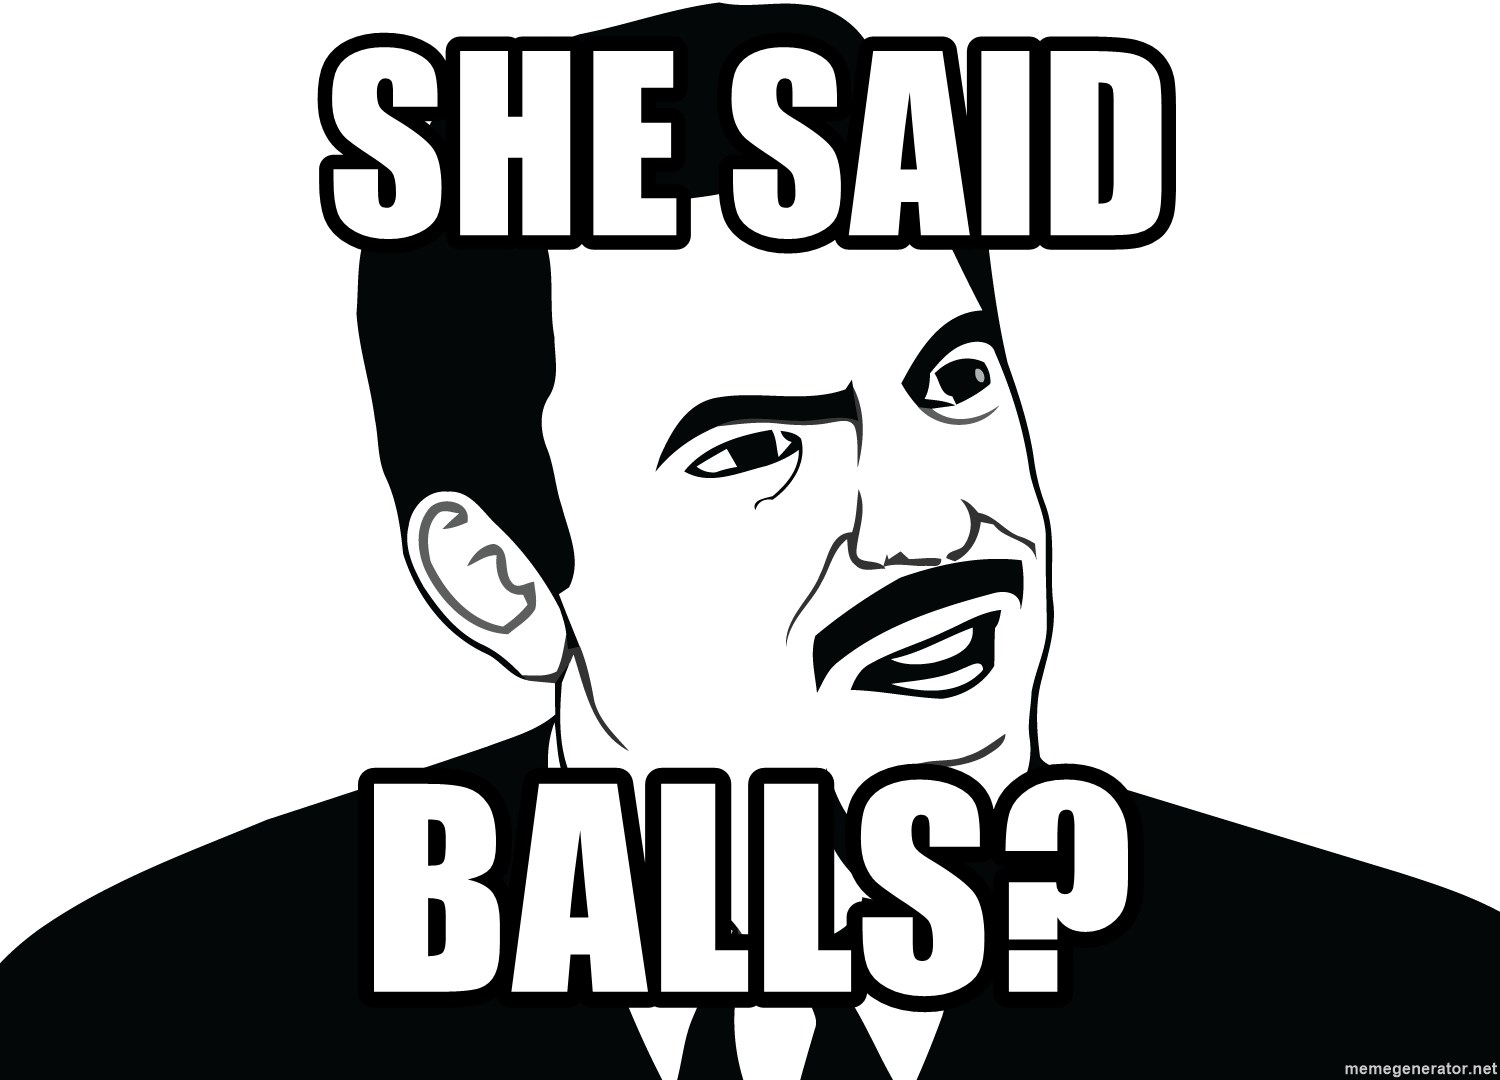 Are you serious face  - She Said Balls?